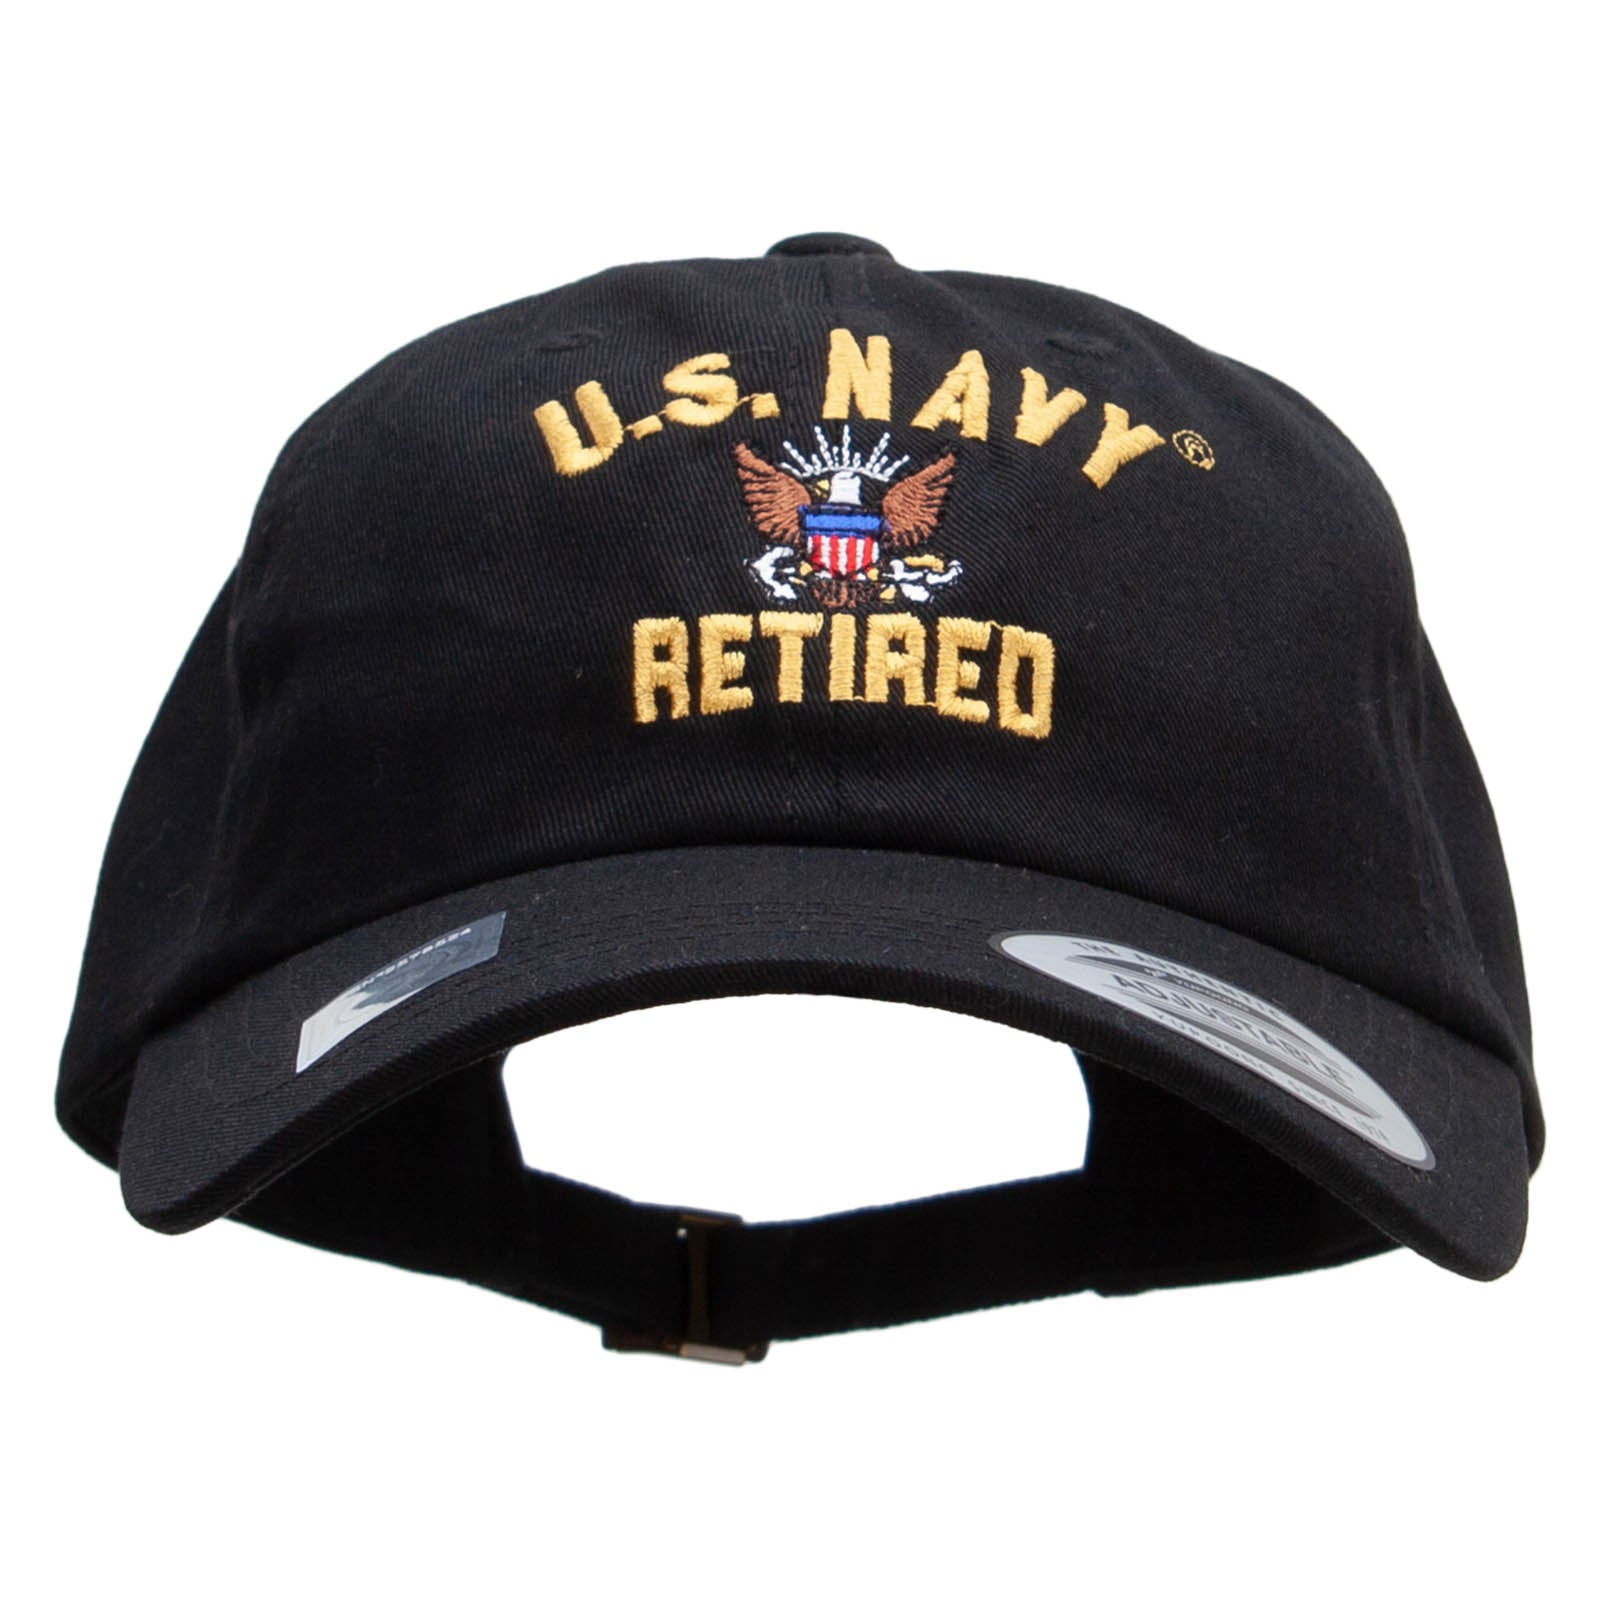 Licensed United States Navy Retired Unstructured Low Profile 6 panel Cotton Cap - Black OSFM